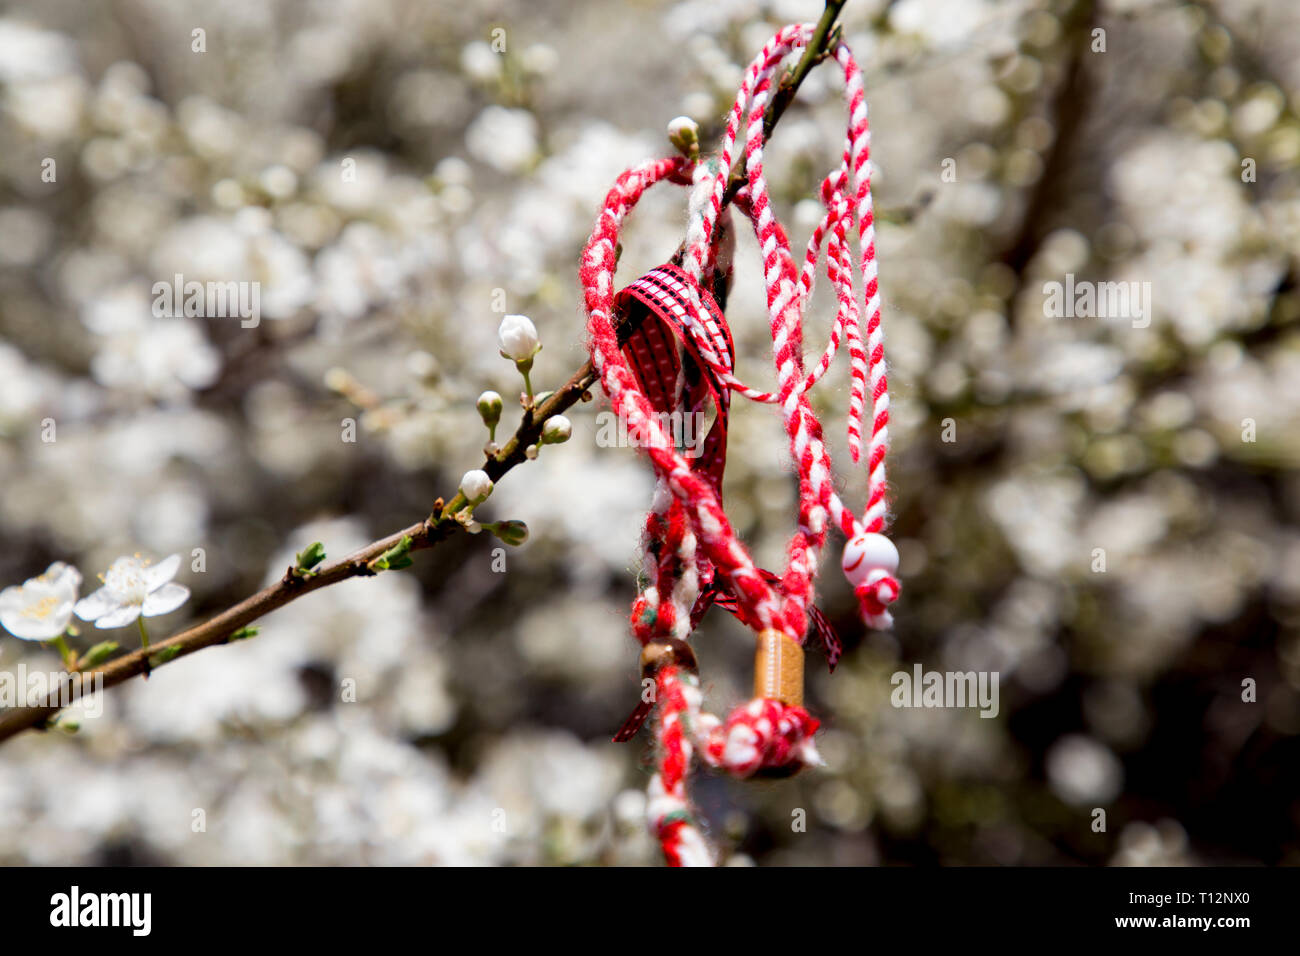 Martenitsa traditionally for Bulgarians is attached to a blooming orchard. Stock Photo